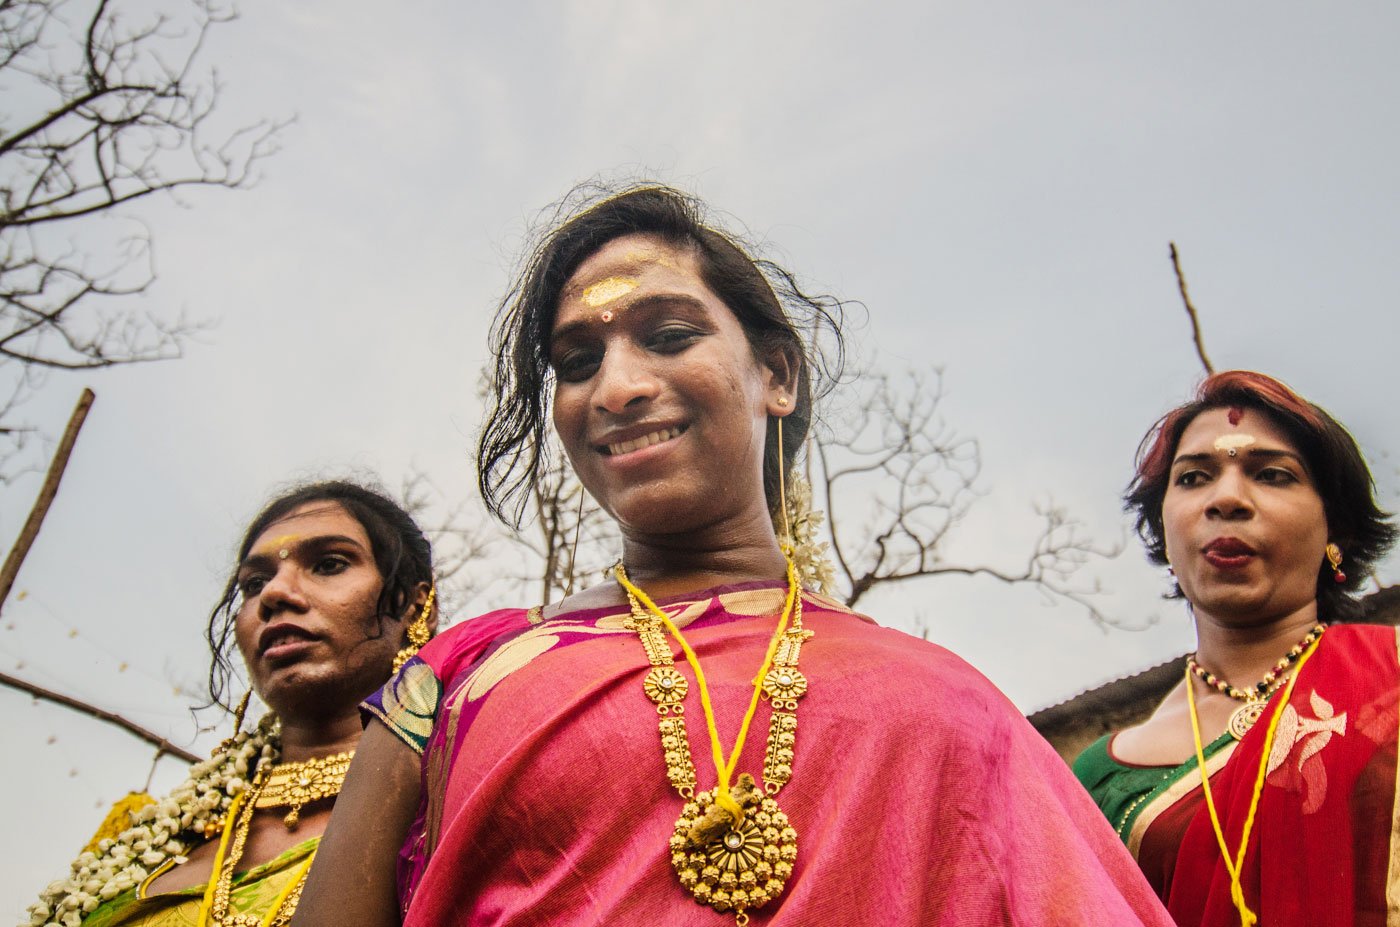 Pinky (centre), the leader of a group of newly-wed aravanis from the outskirts of Chennai, is thrilled to be married. A portrait of three transgender women